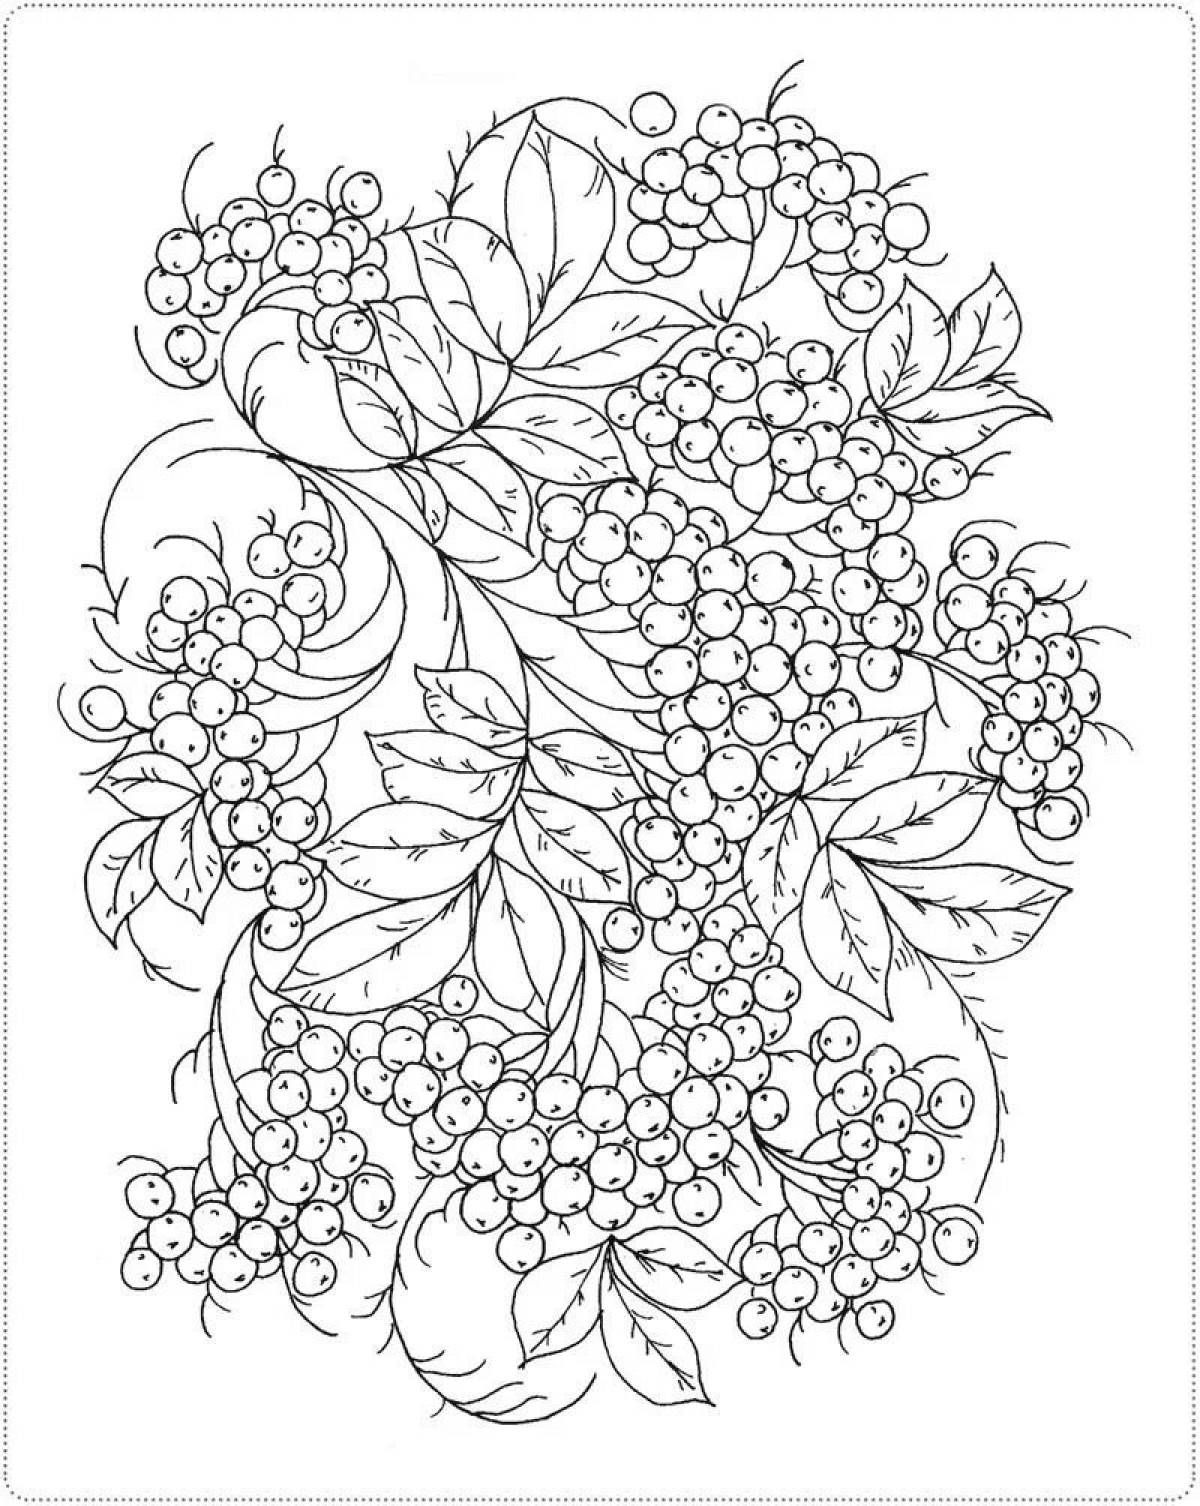 Refreshing autumn bouquet coloring book